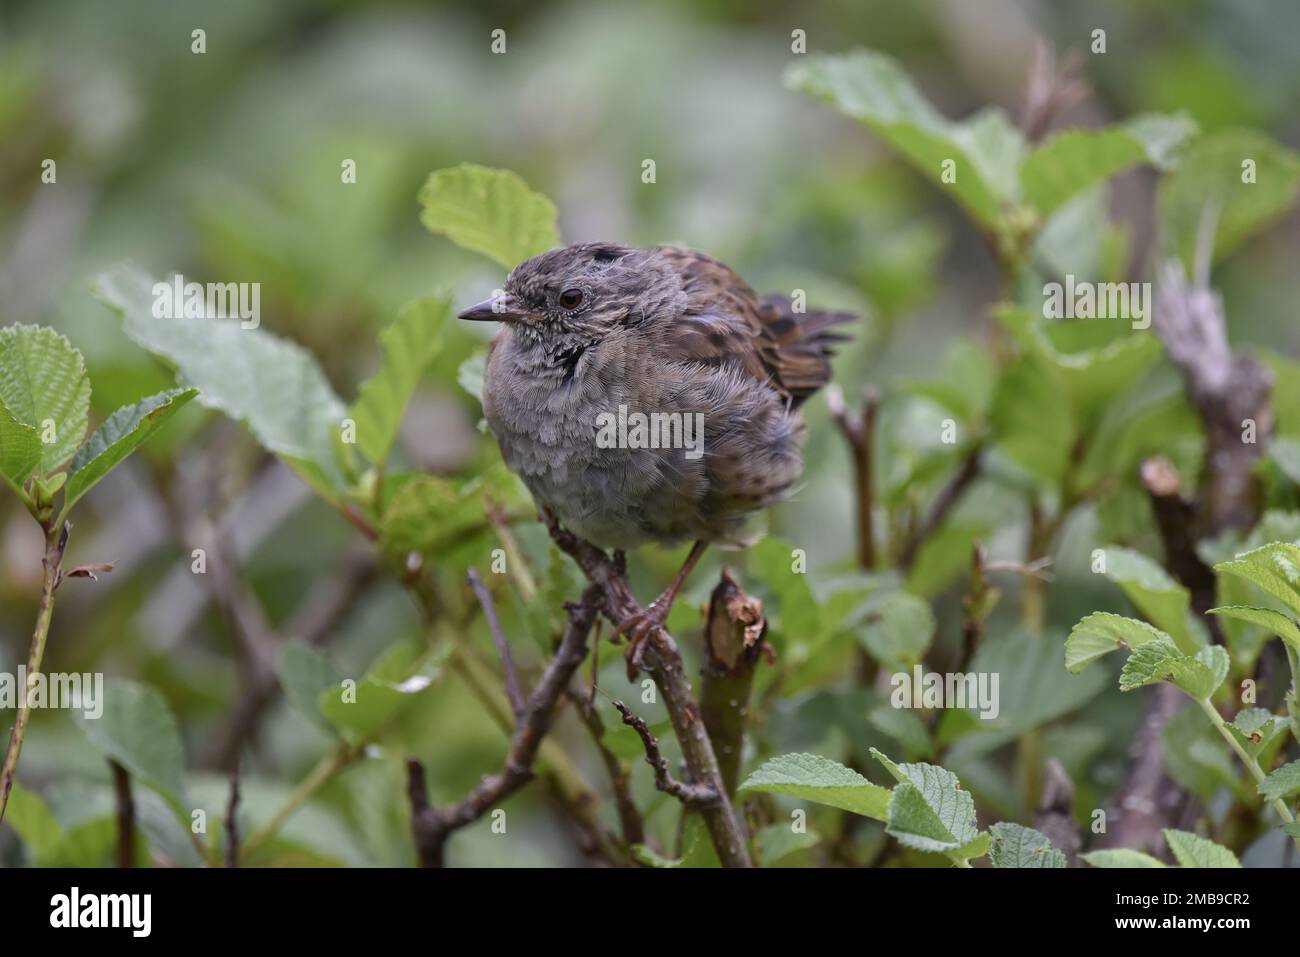 Close-Up Image of a Fledgling Dunnock (Prunella modularis) Facing Camera with Head Turned to Left of Image, Perched on Top of a Hedge in the UK Stock Photo